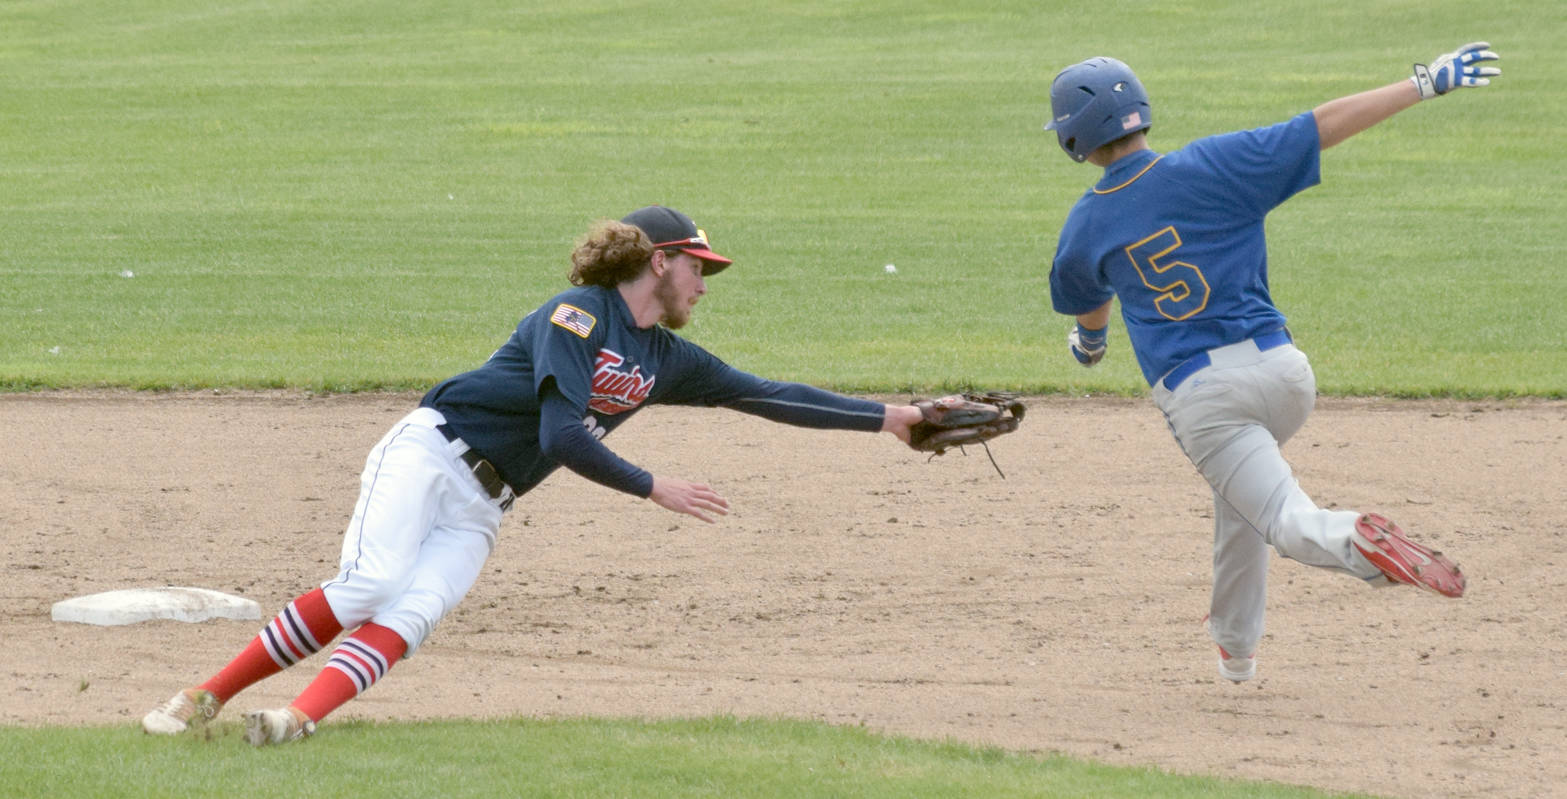 Kodiak’s Jace Crall eludes the tag of Twins second baseman David Michael in the fourth inning Monday, June 25, 2018, at Coral Seymour Memorial Park in Kenai. (Photo by Jeff Helminiak/Peninsula Clarion)